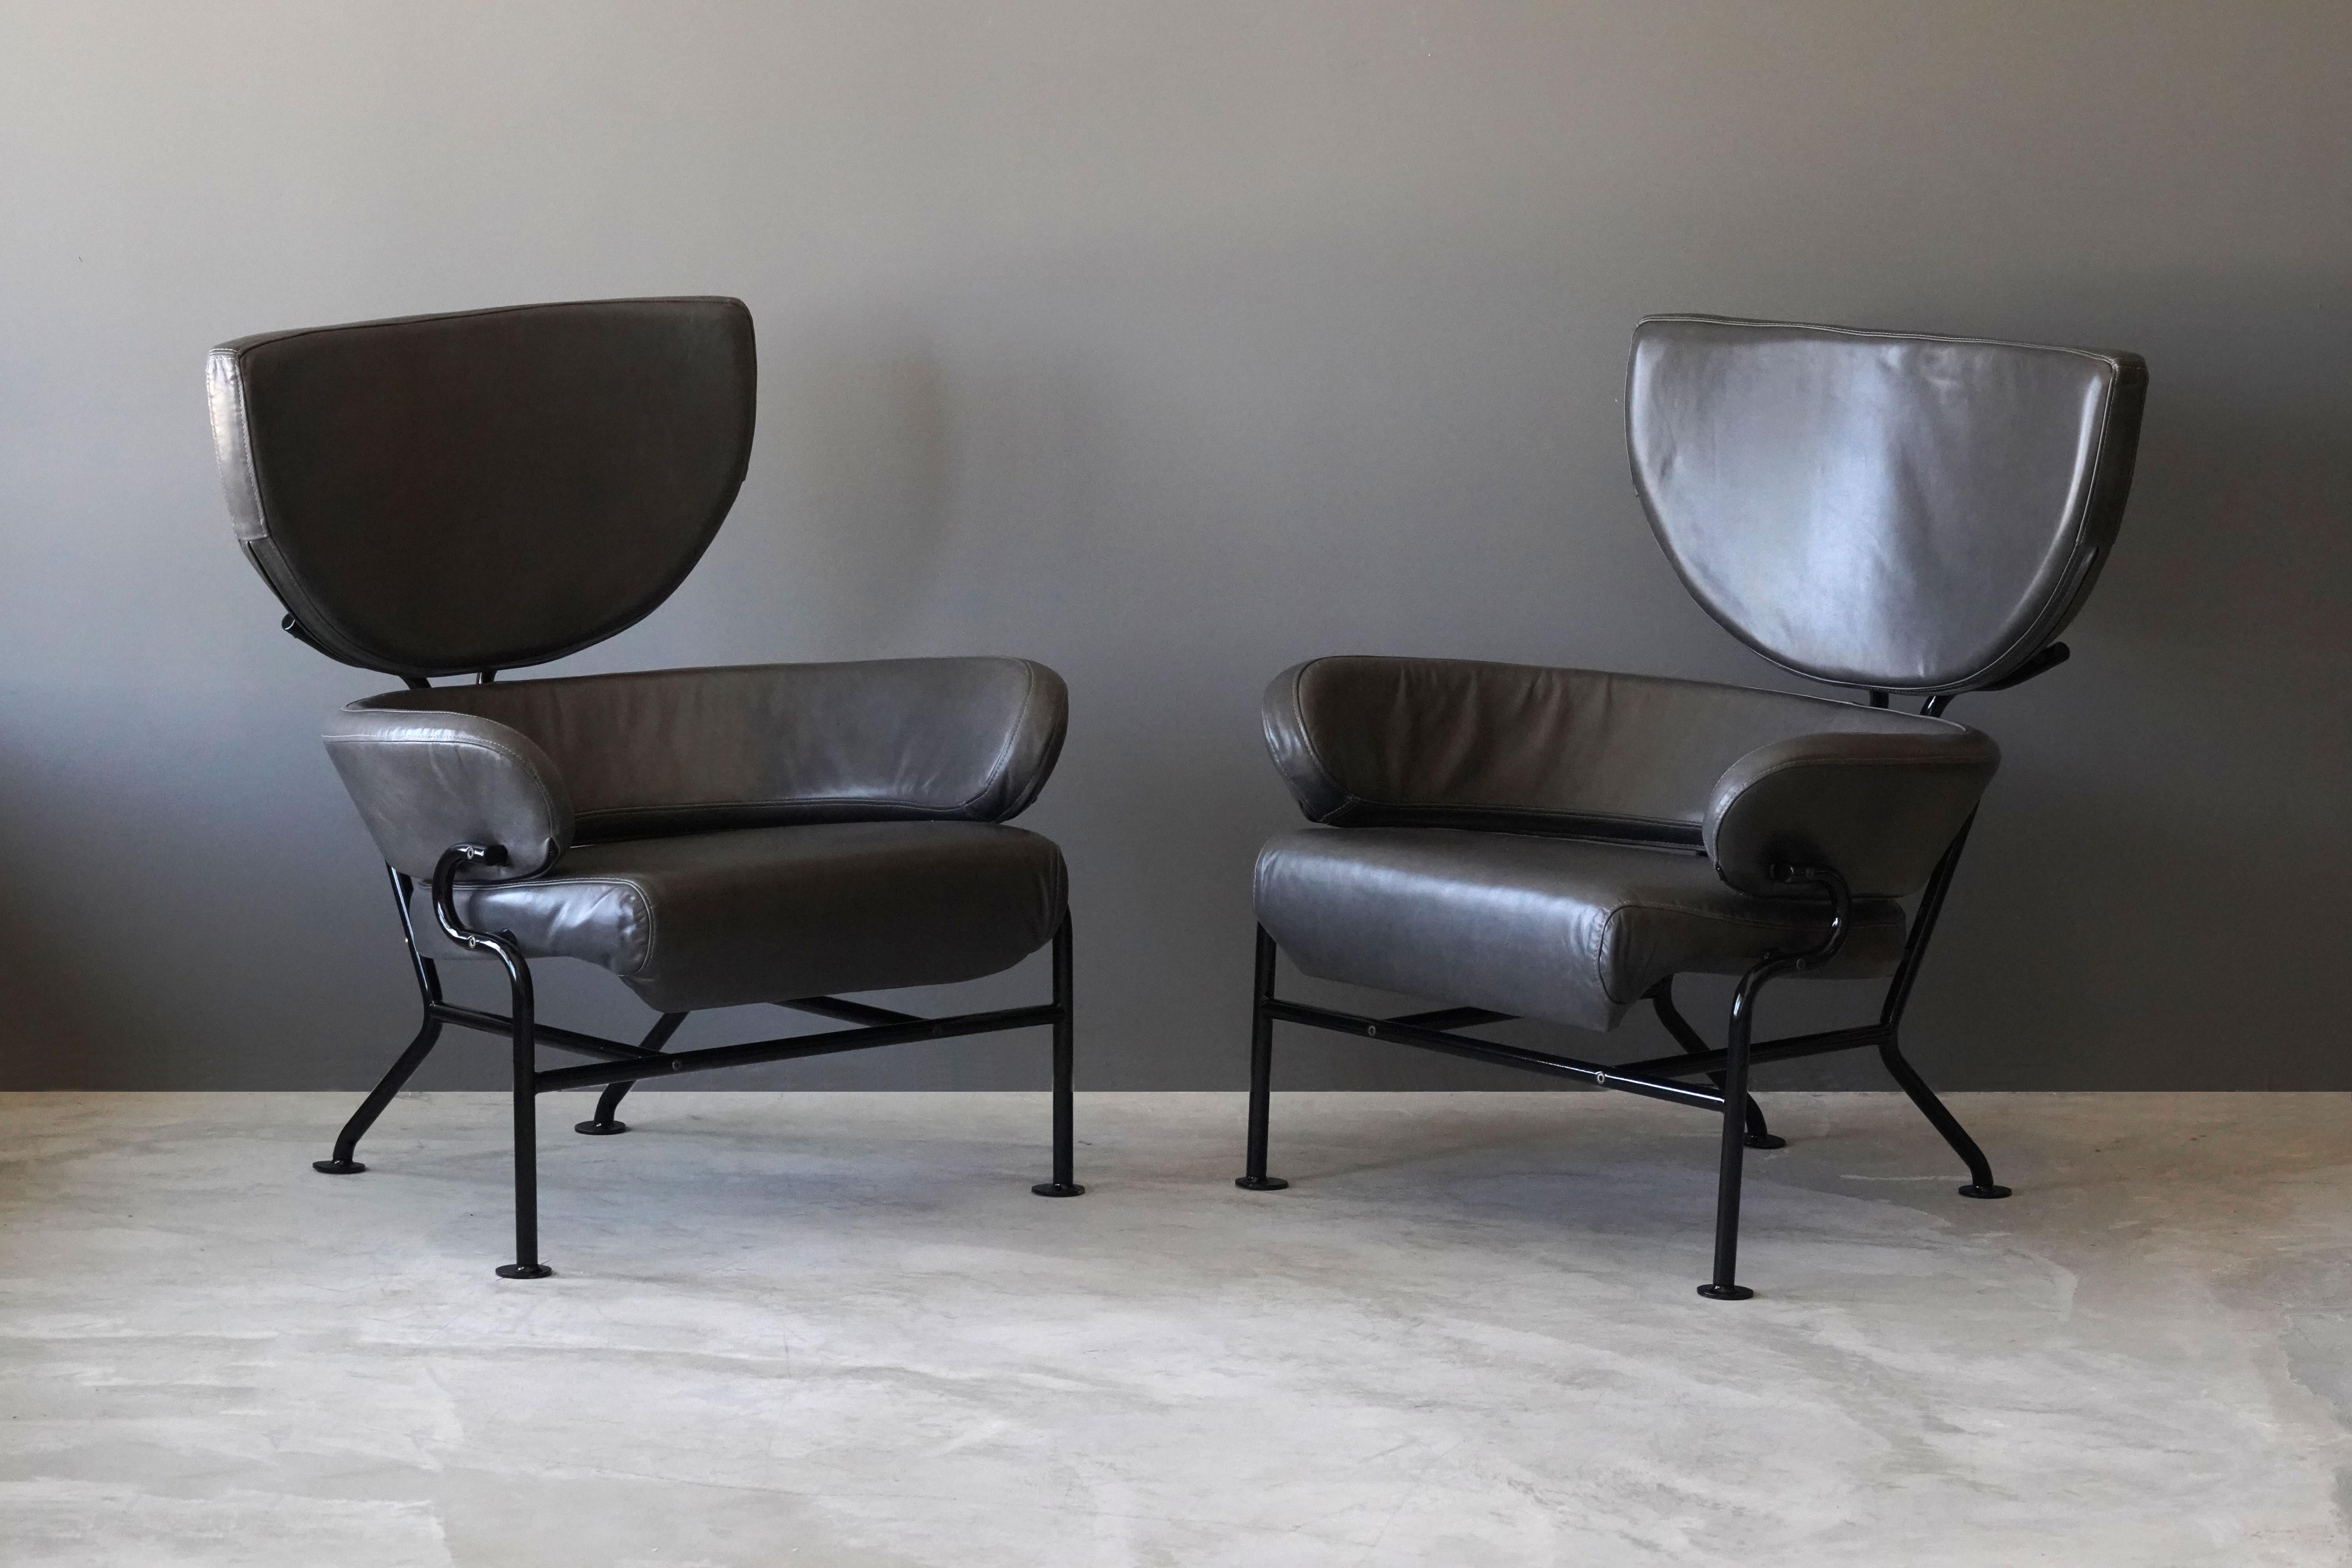 A pair of beautiful and comfortable lounge chairs by famous Italian modernist Franco Albini and Franca Helg

